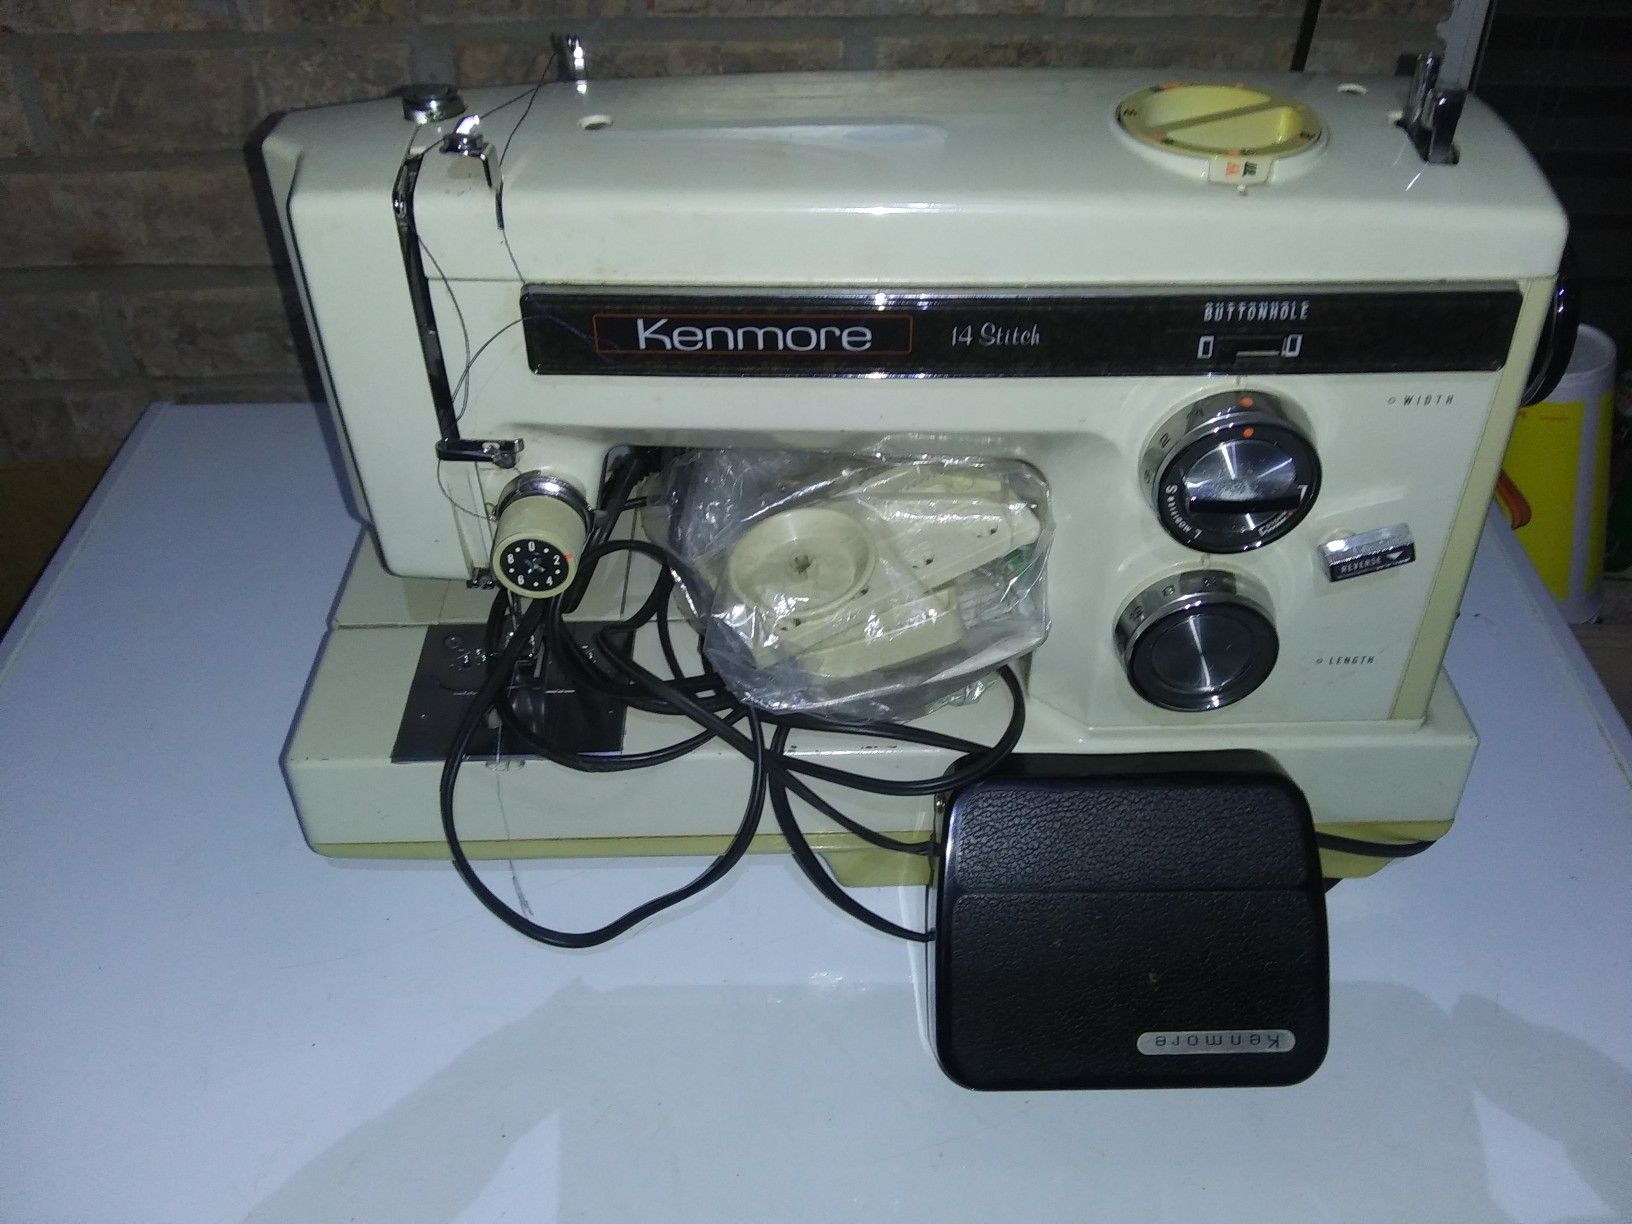 Kenmore sewing machine 14 Stitch model number in pic Works smooth and excellent, all accessories and attachments